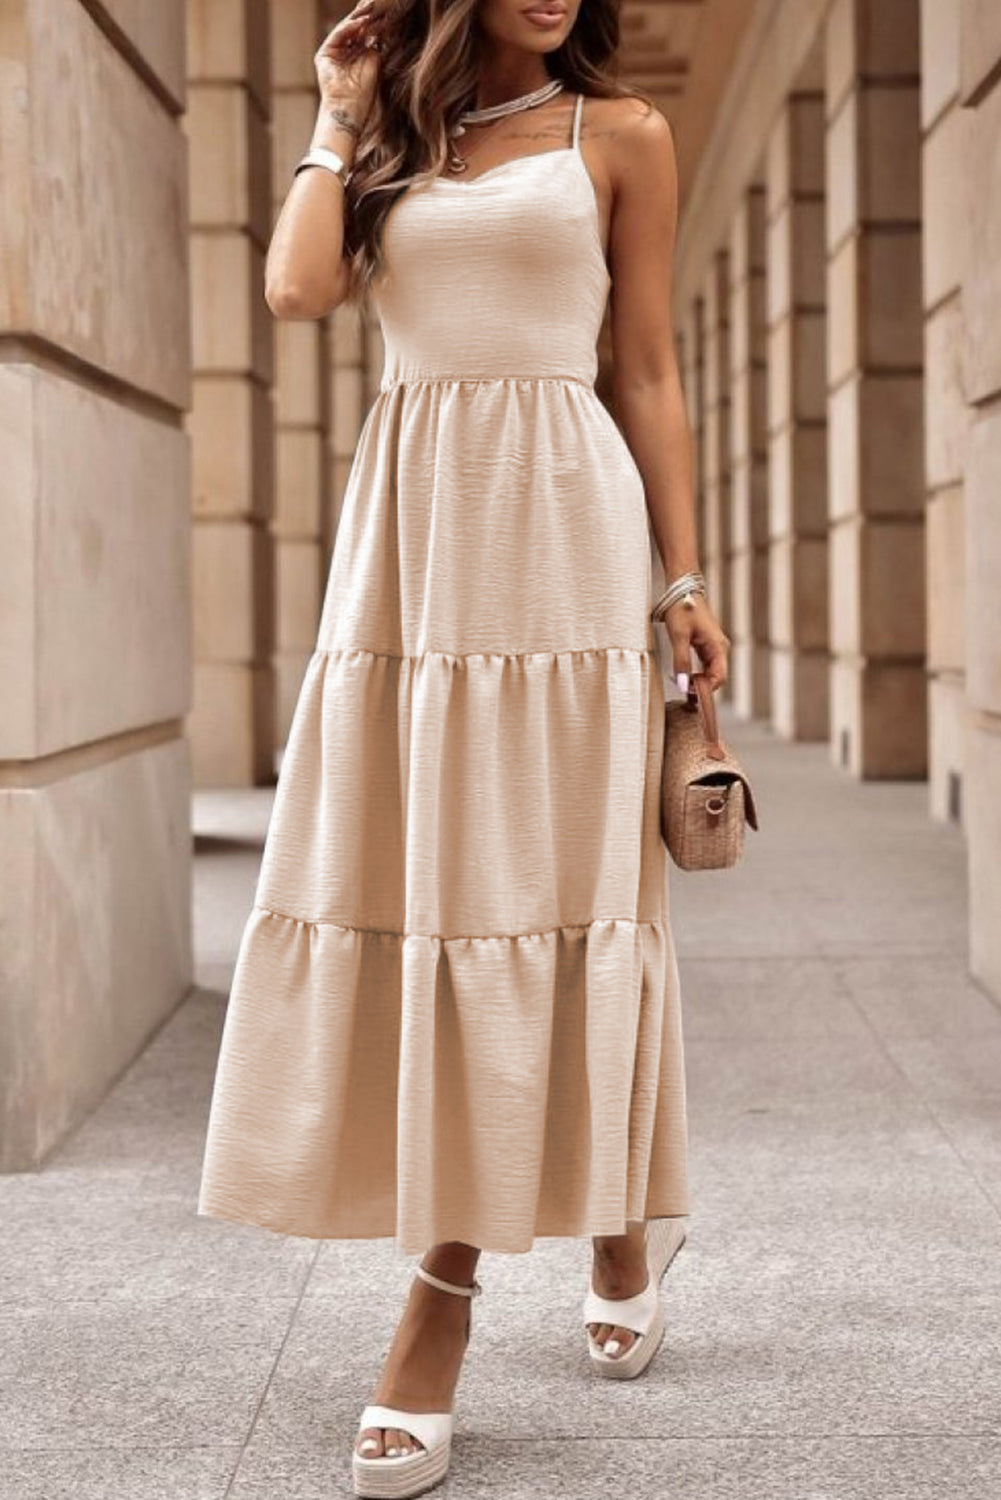 Oatmeal Crossover Backless Bodice Tiered Maxi Dress